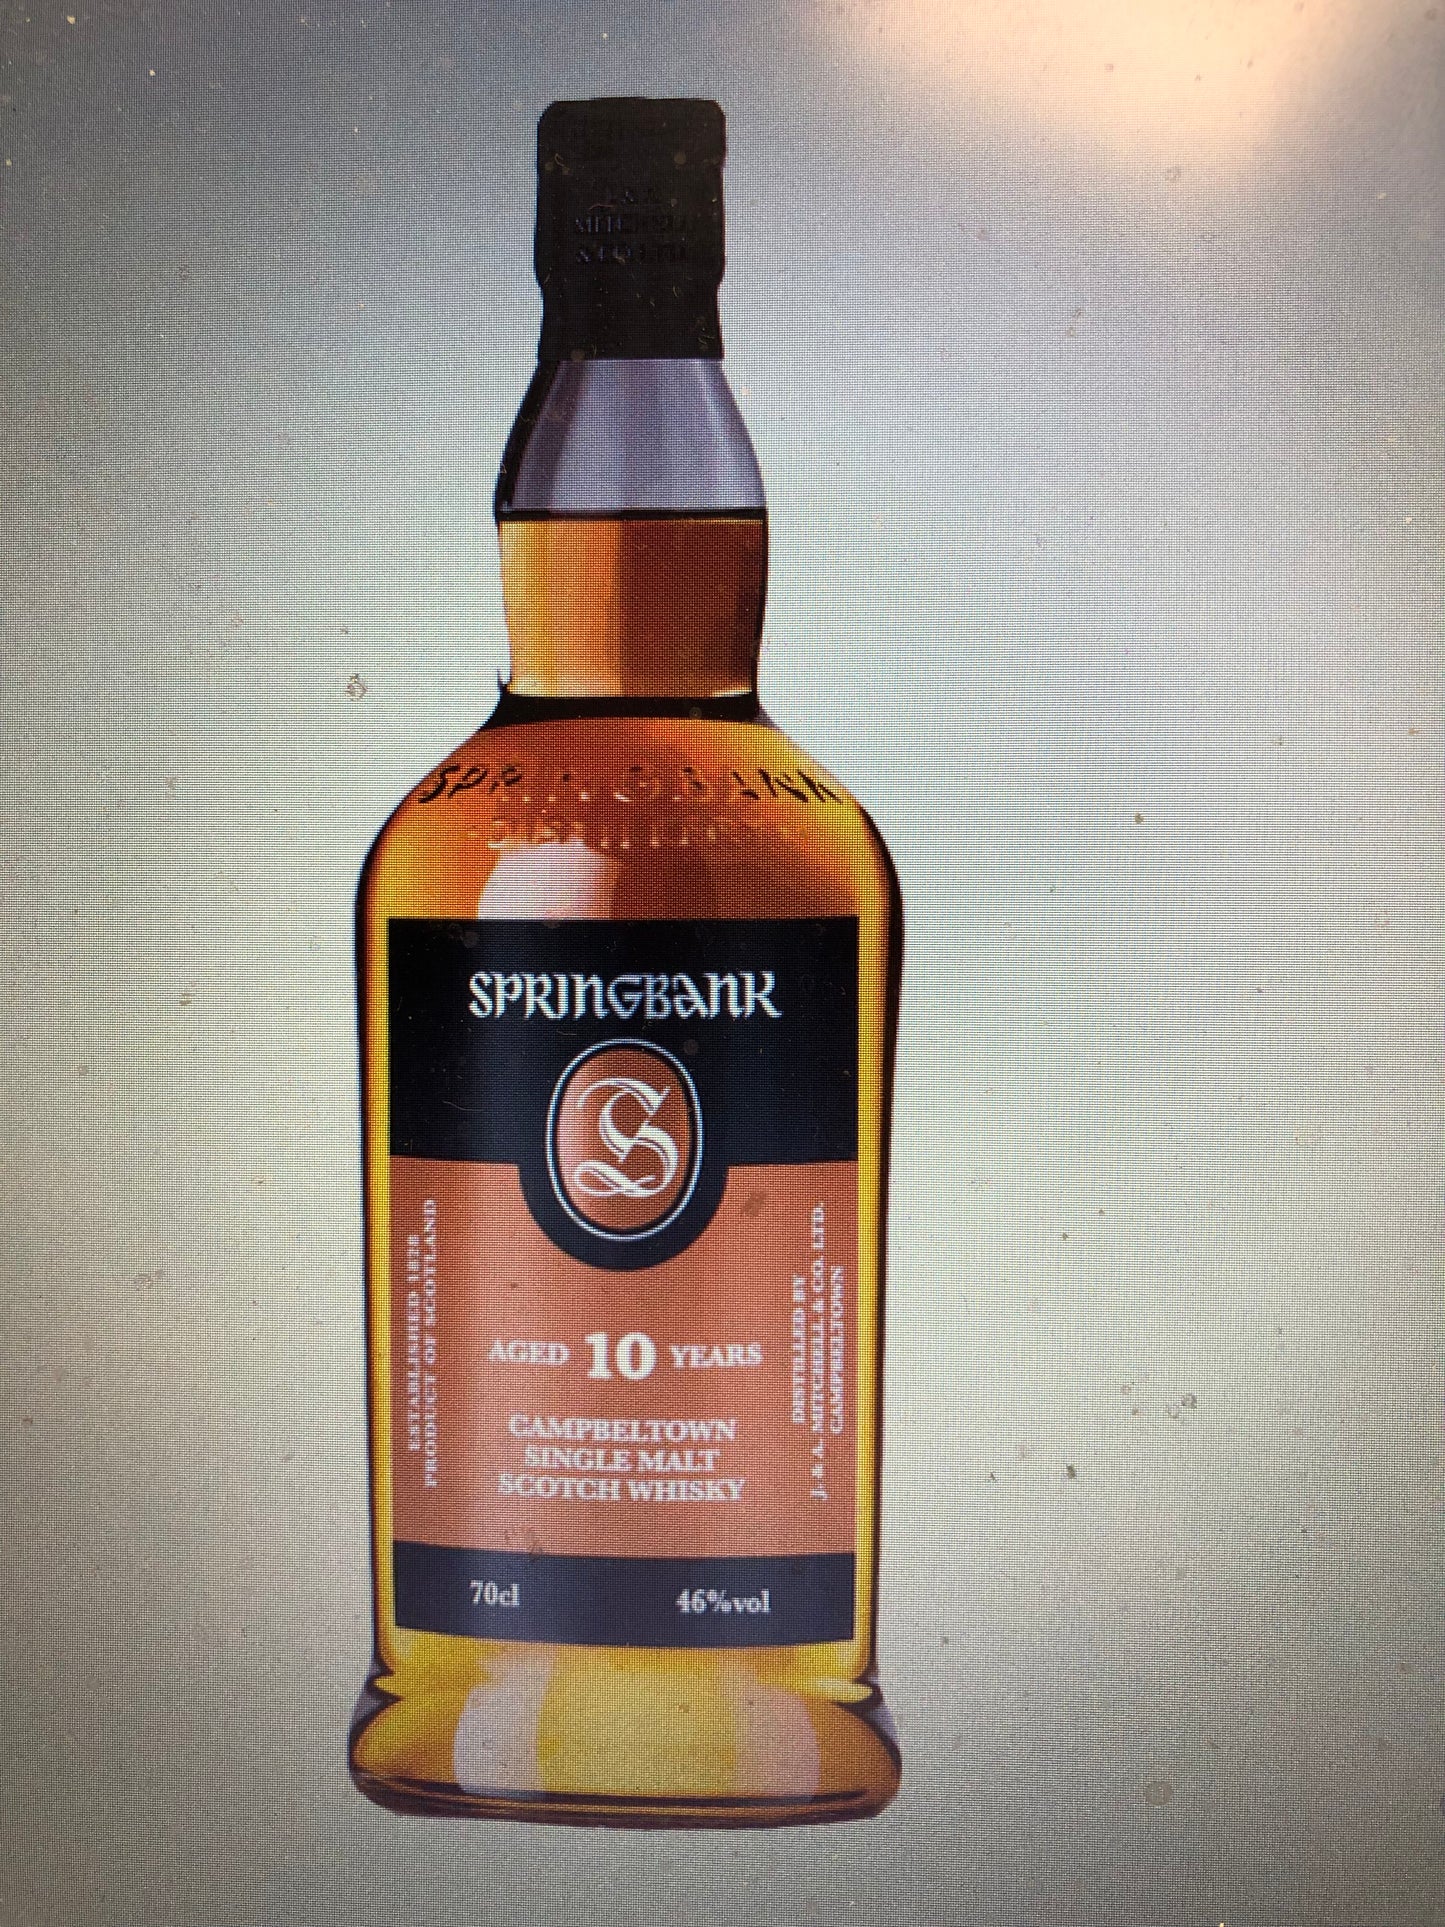 Springbank aged 10 years 70cl 46% ABV